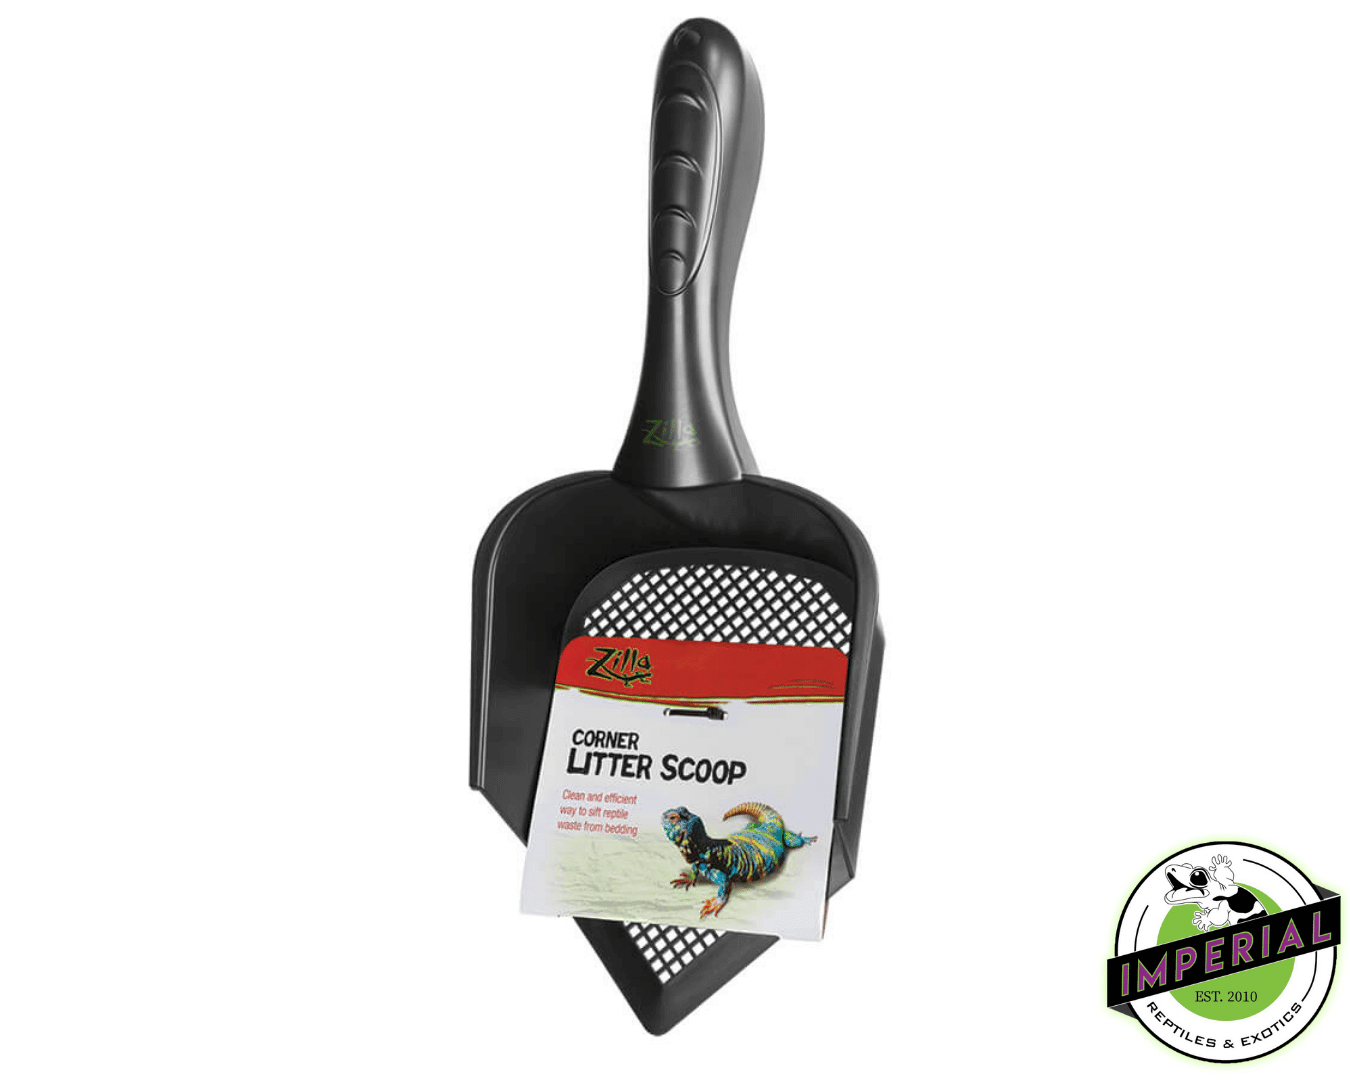 reptile sand scooper to spot clean reptile tanks. buy reptile cleaning tools online at cheap prices